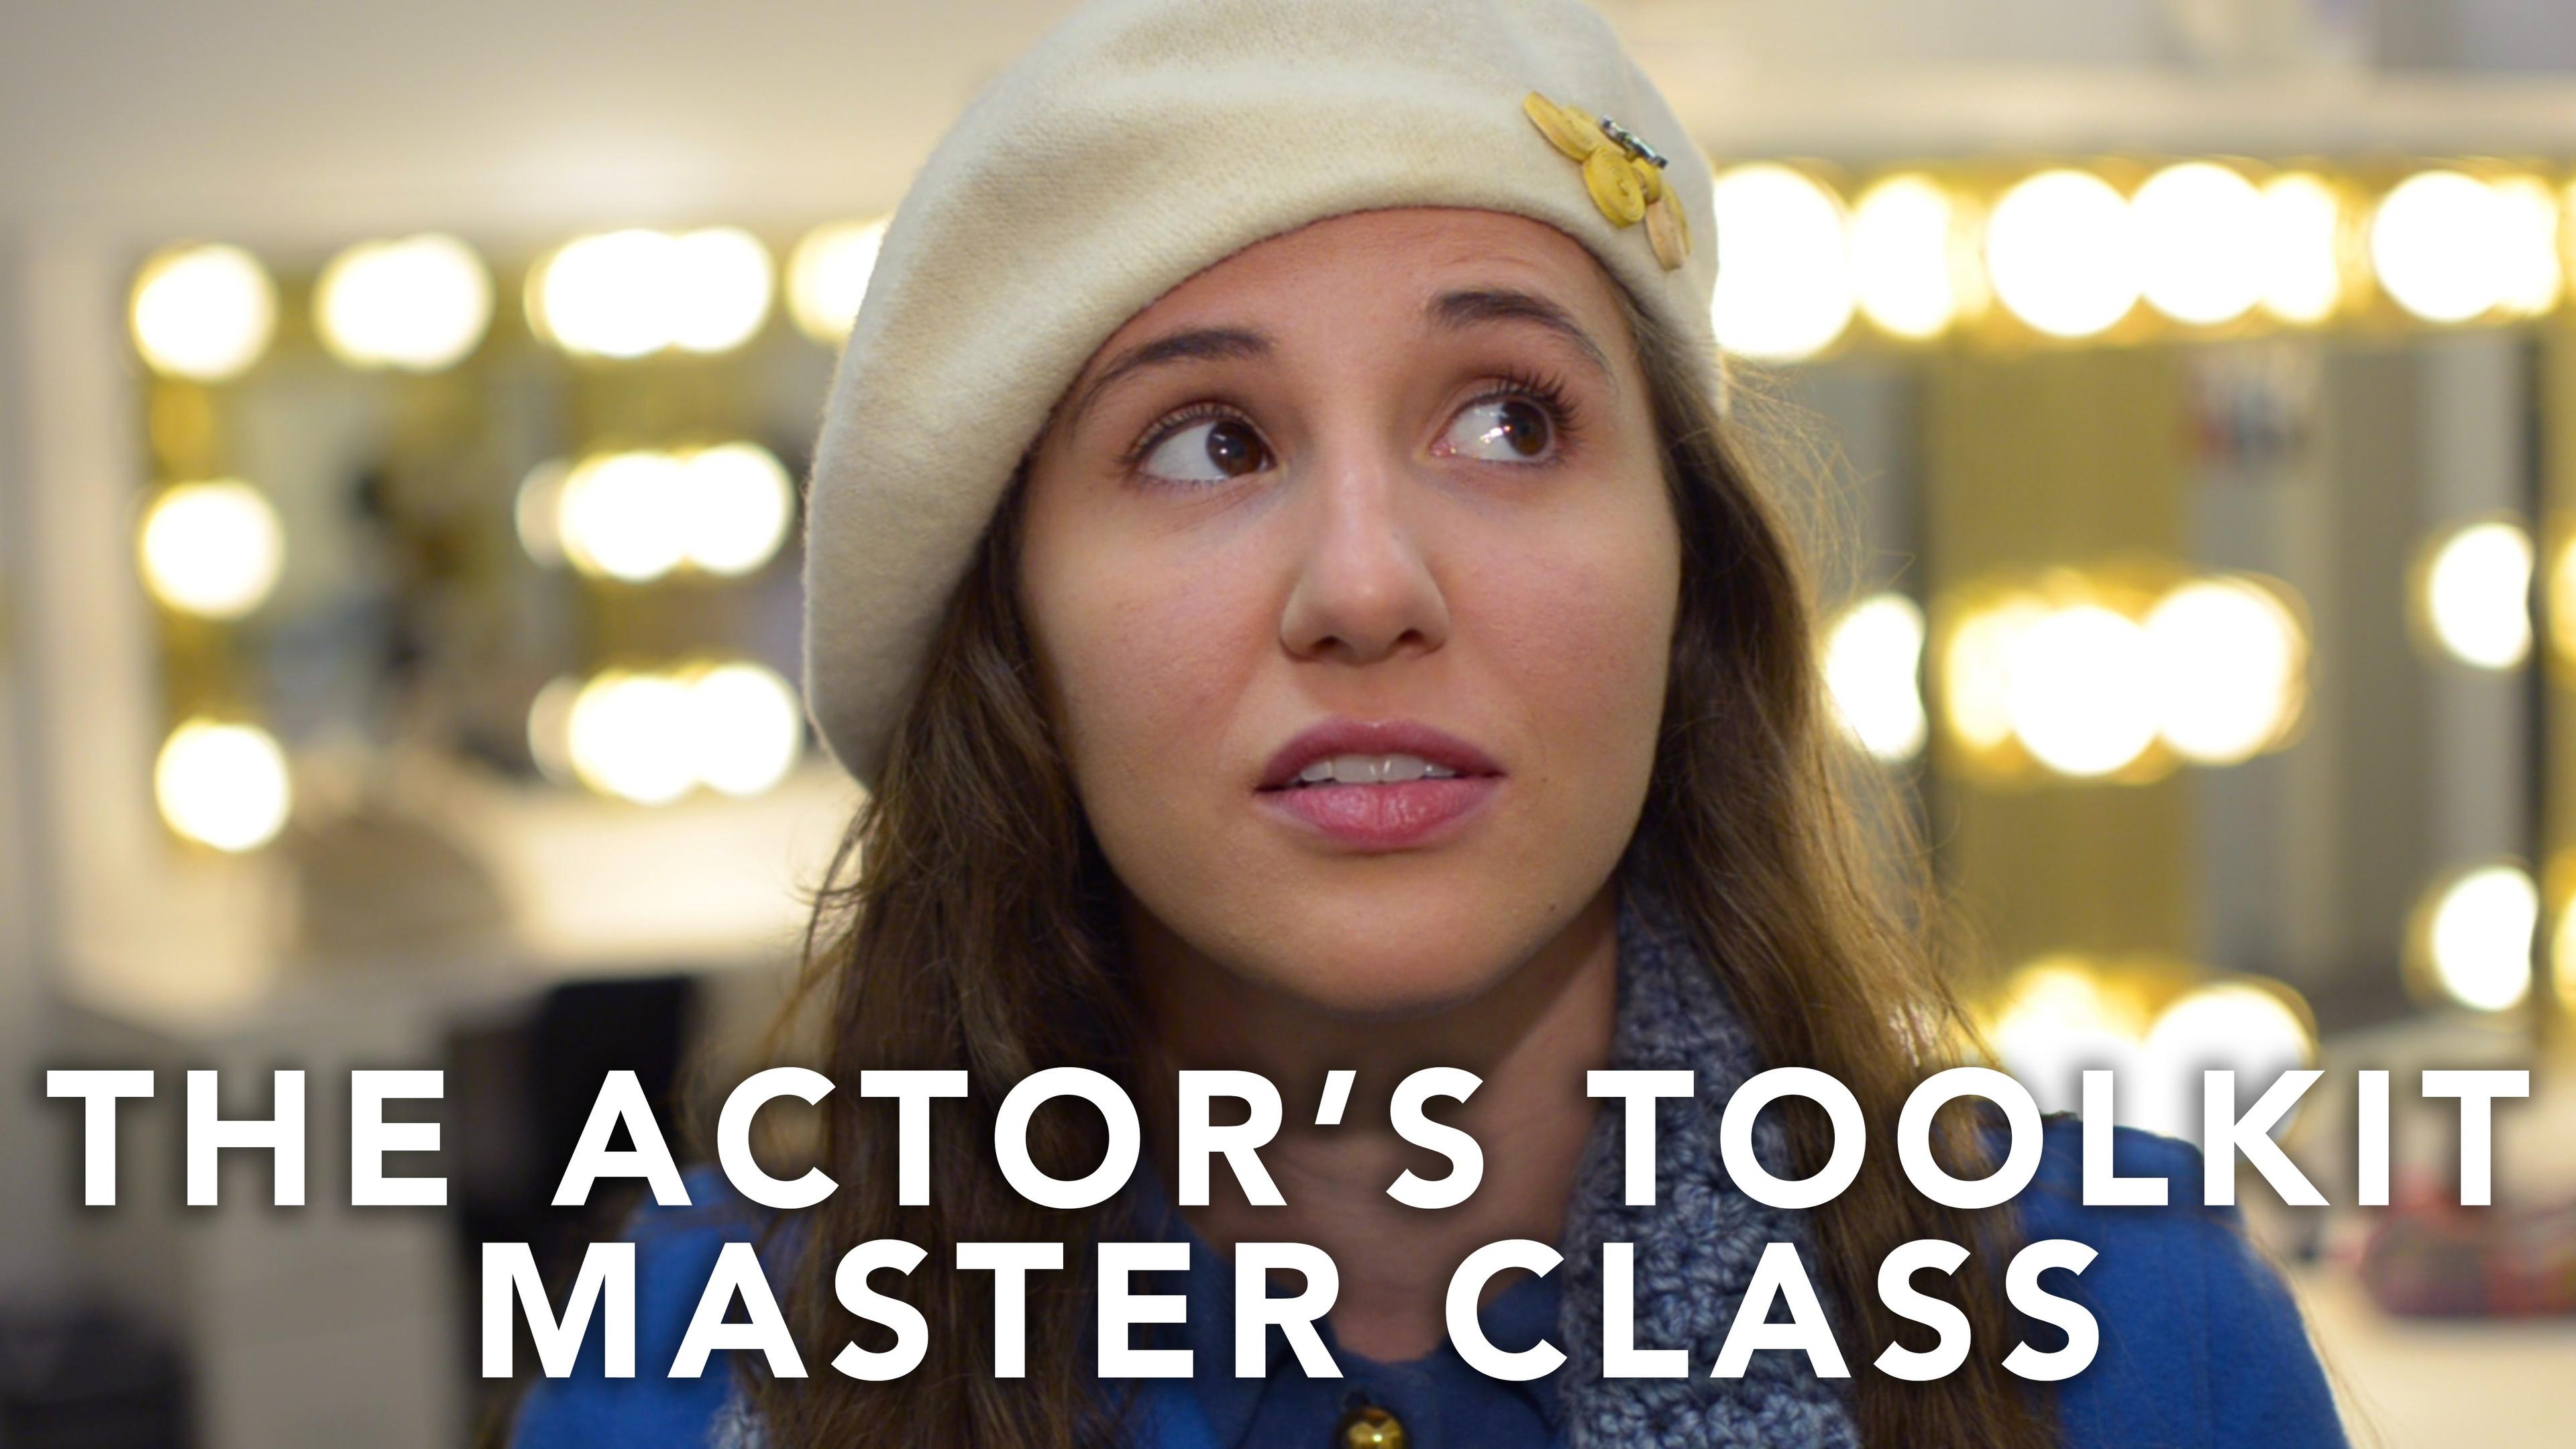 The Actor's Toolkit Master Class